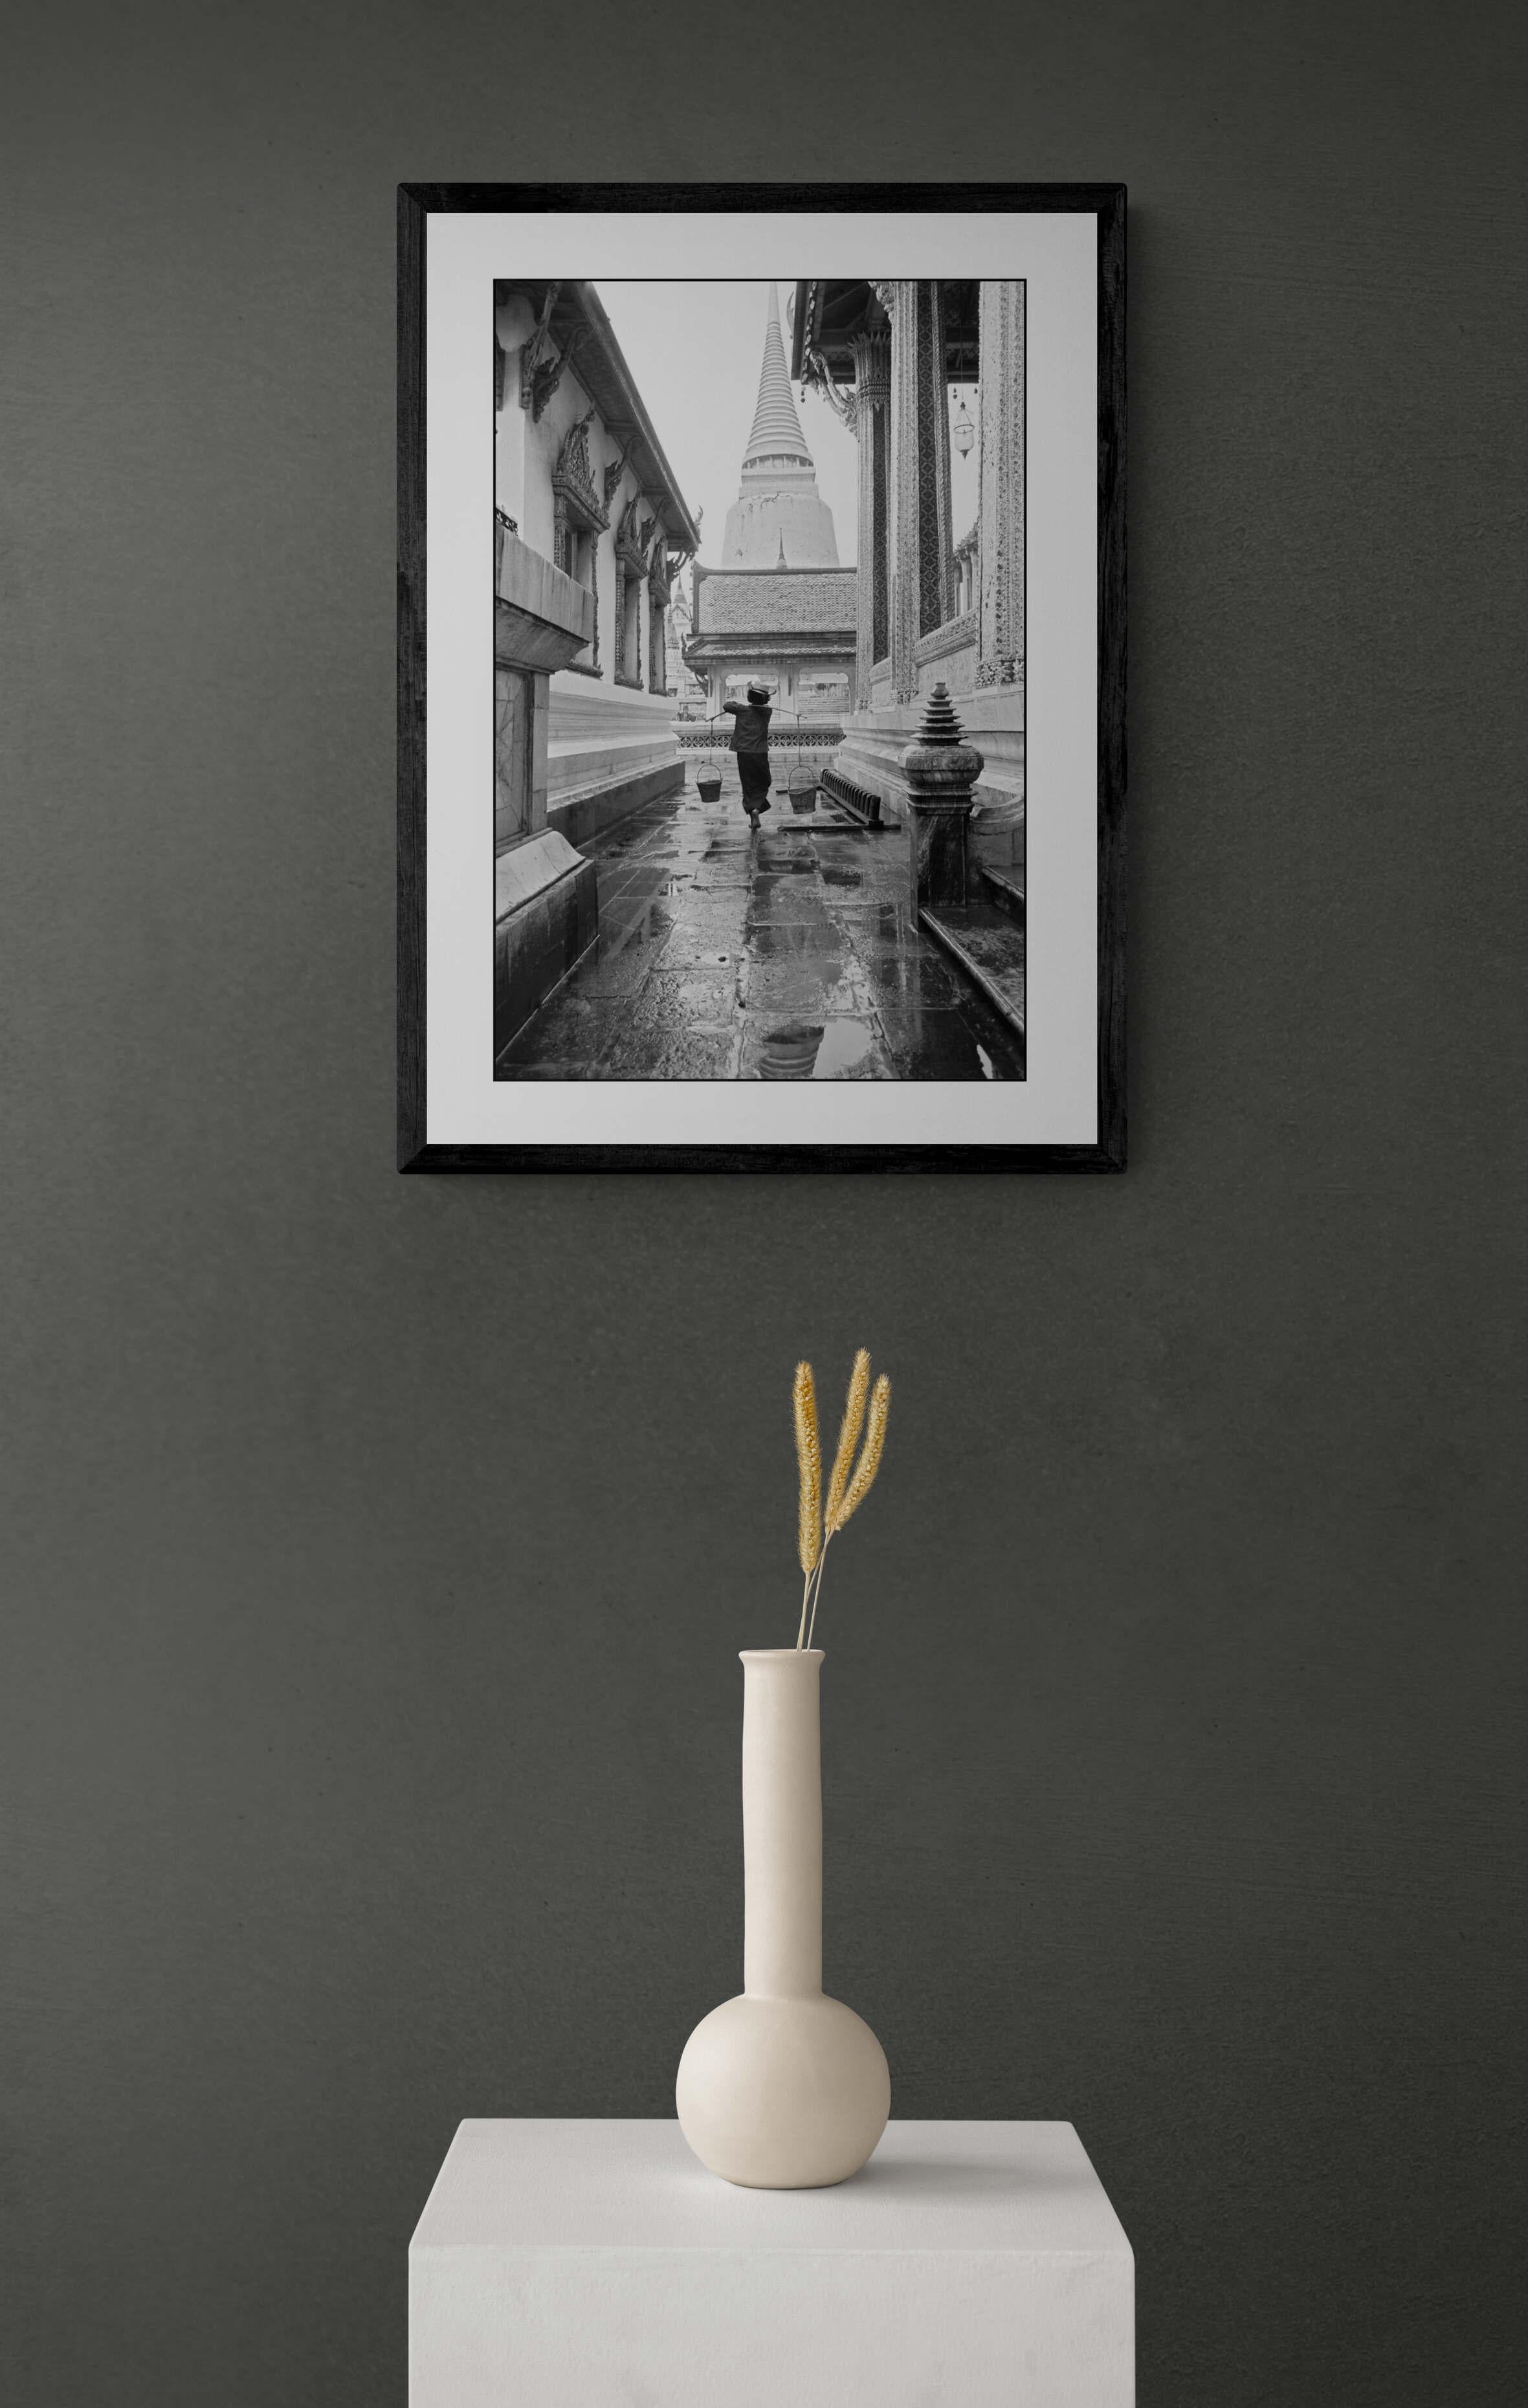 Artwork # 1 of 5 sold in limited edition in perfect condition 
The water carrier -  Thailand 
This is a Minimalist framing & presentation of the artwork :
The Fine Art print on Baryta paper is mounted on a 2mm dibond plate and fixed by magnetic